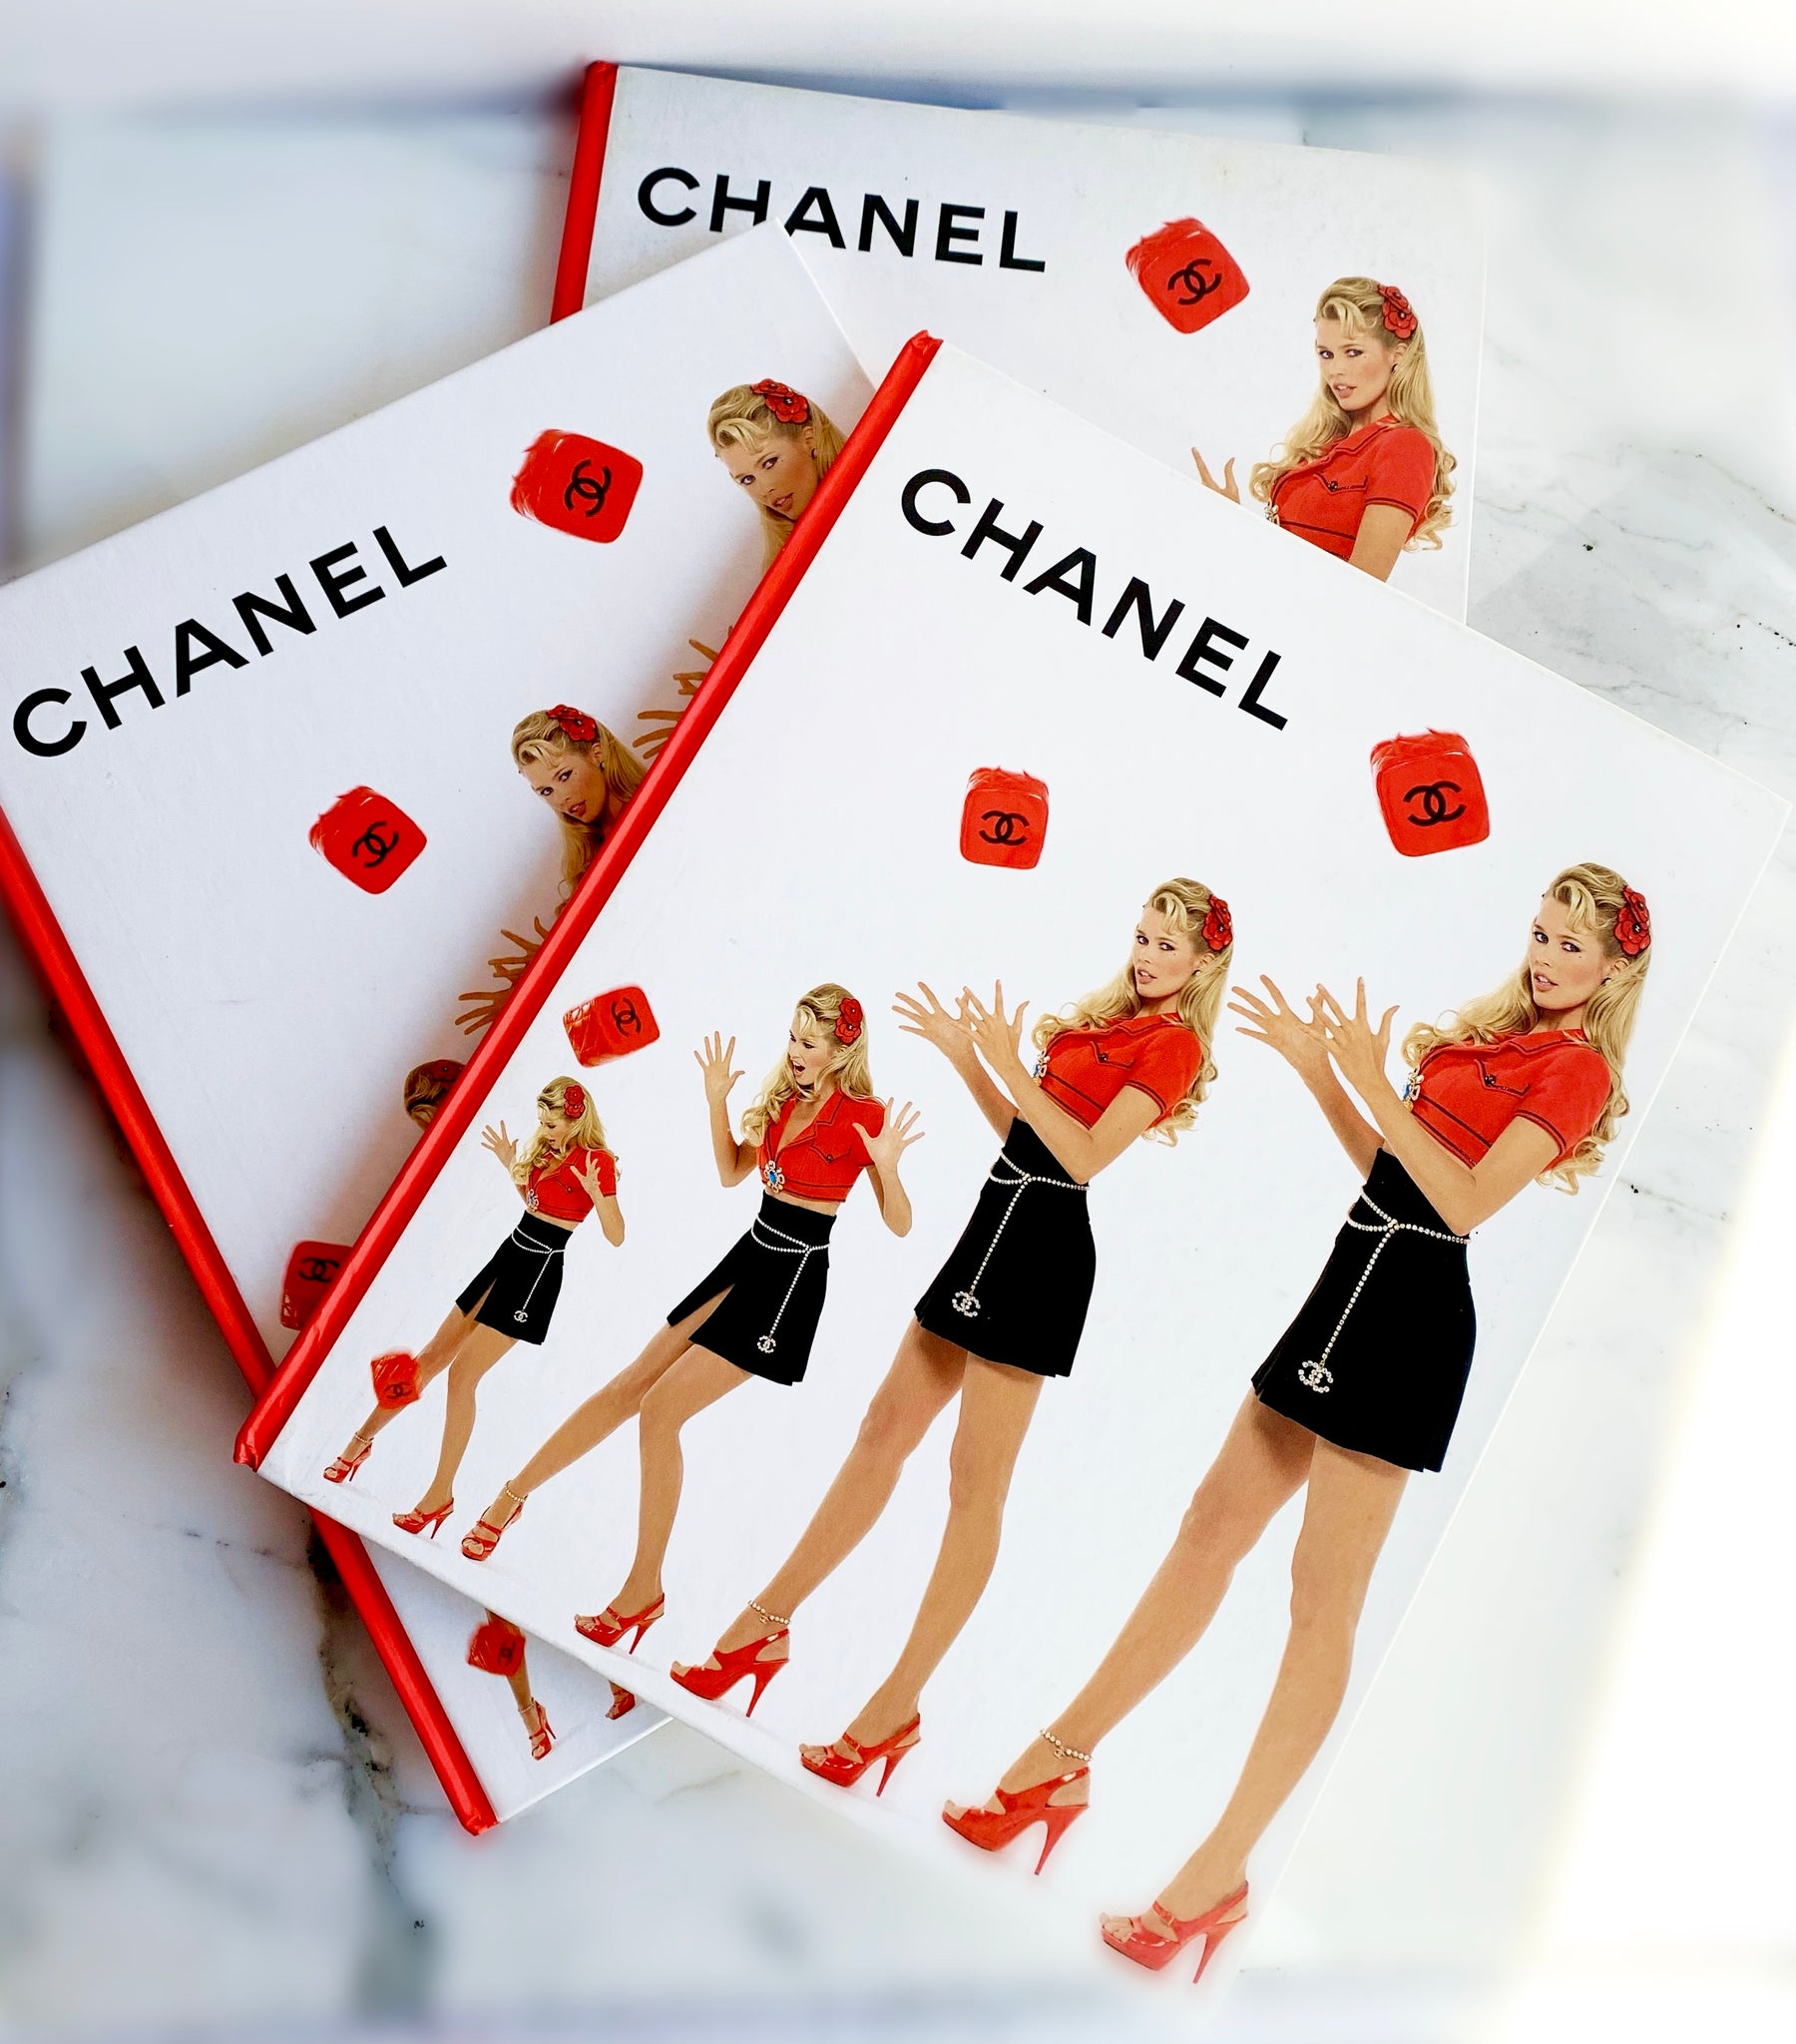 CHANEL BARBIE 1995 SPRING COLLECTION HARDCOVER CATALOGUE CLAUDIA SCHIF –  The Paris Mademoiselle